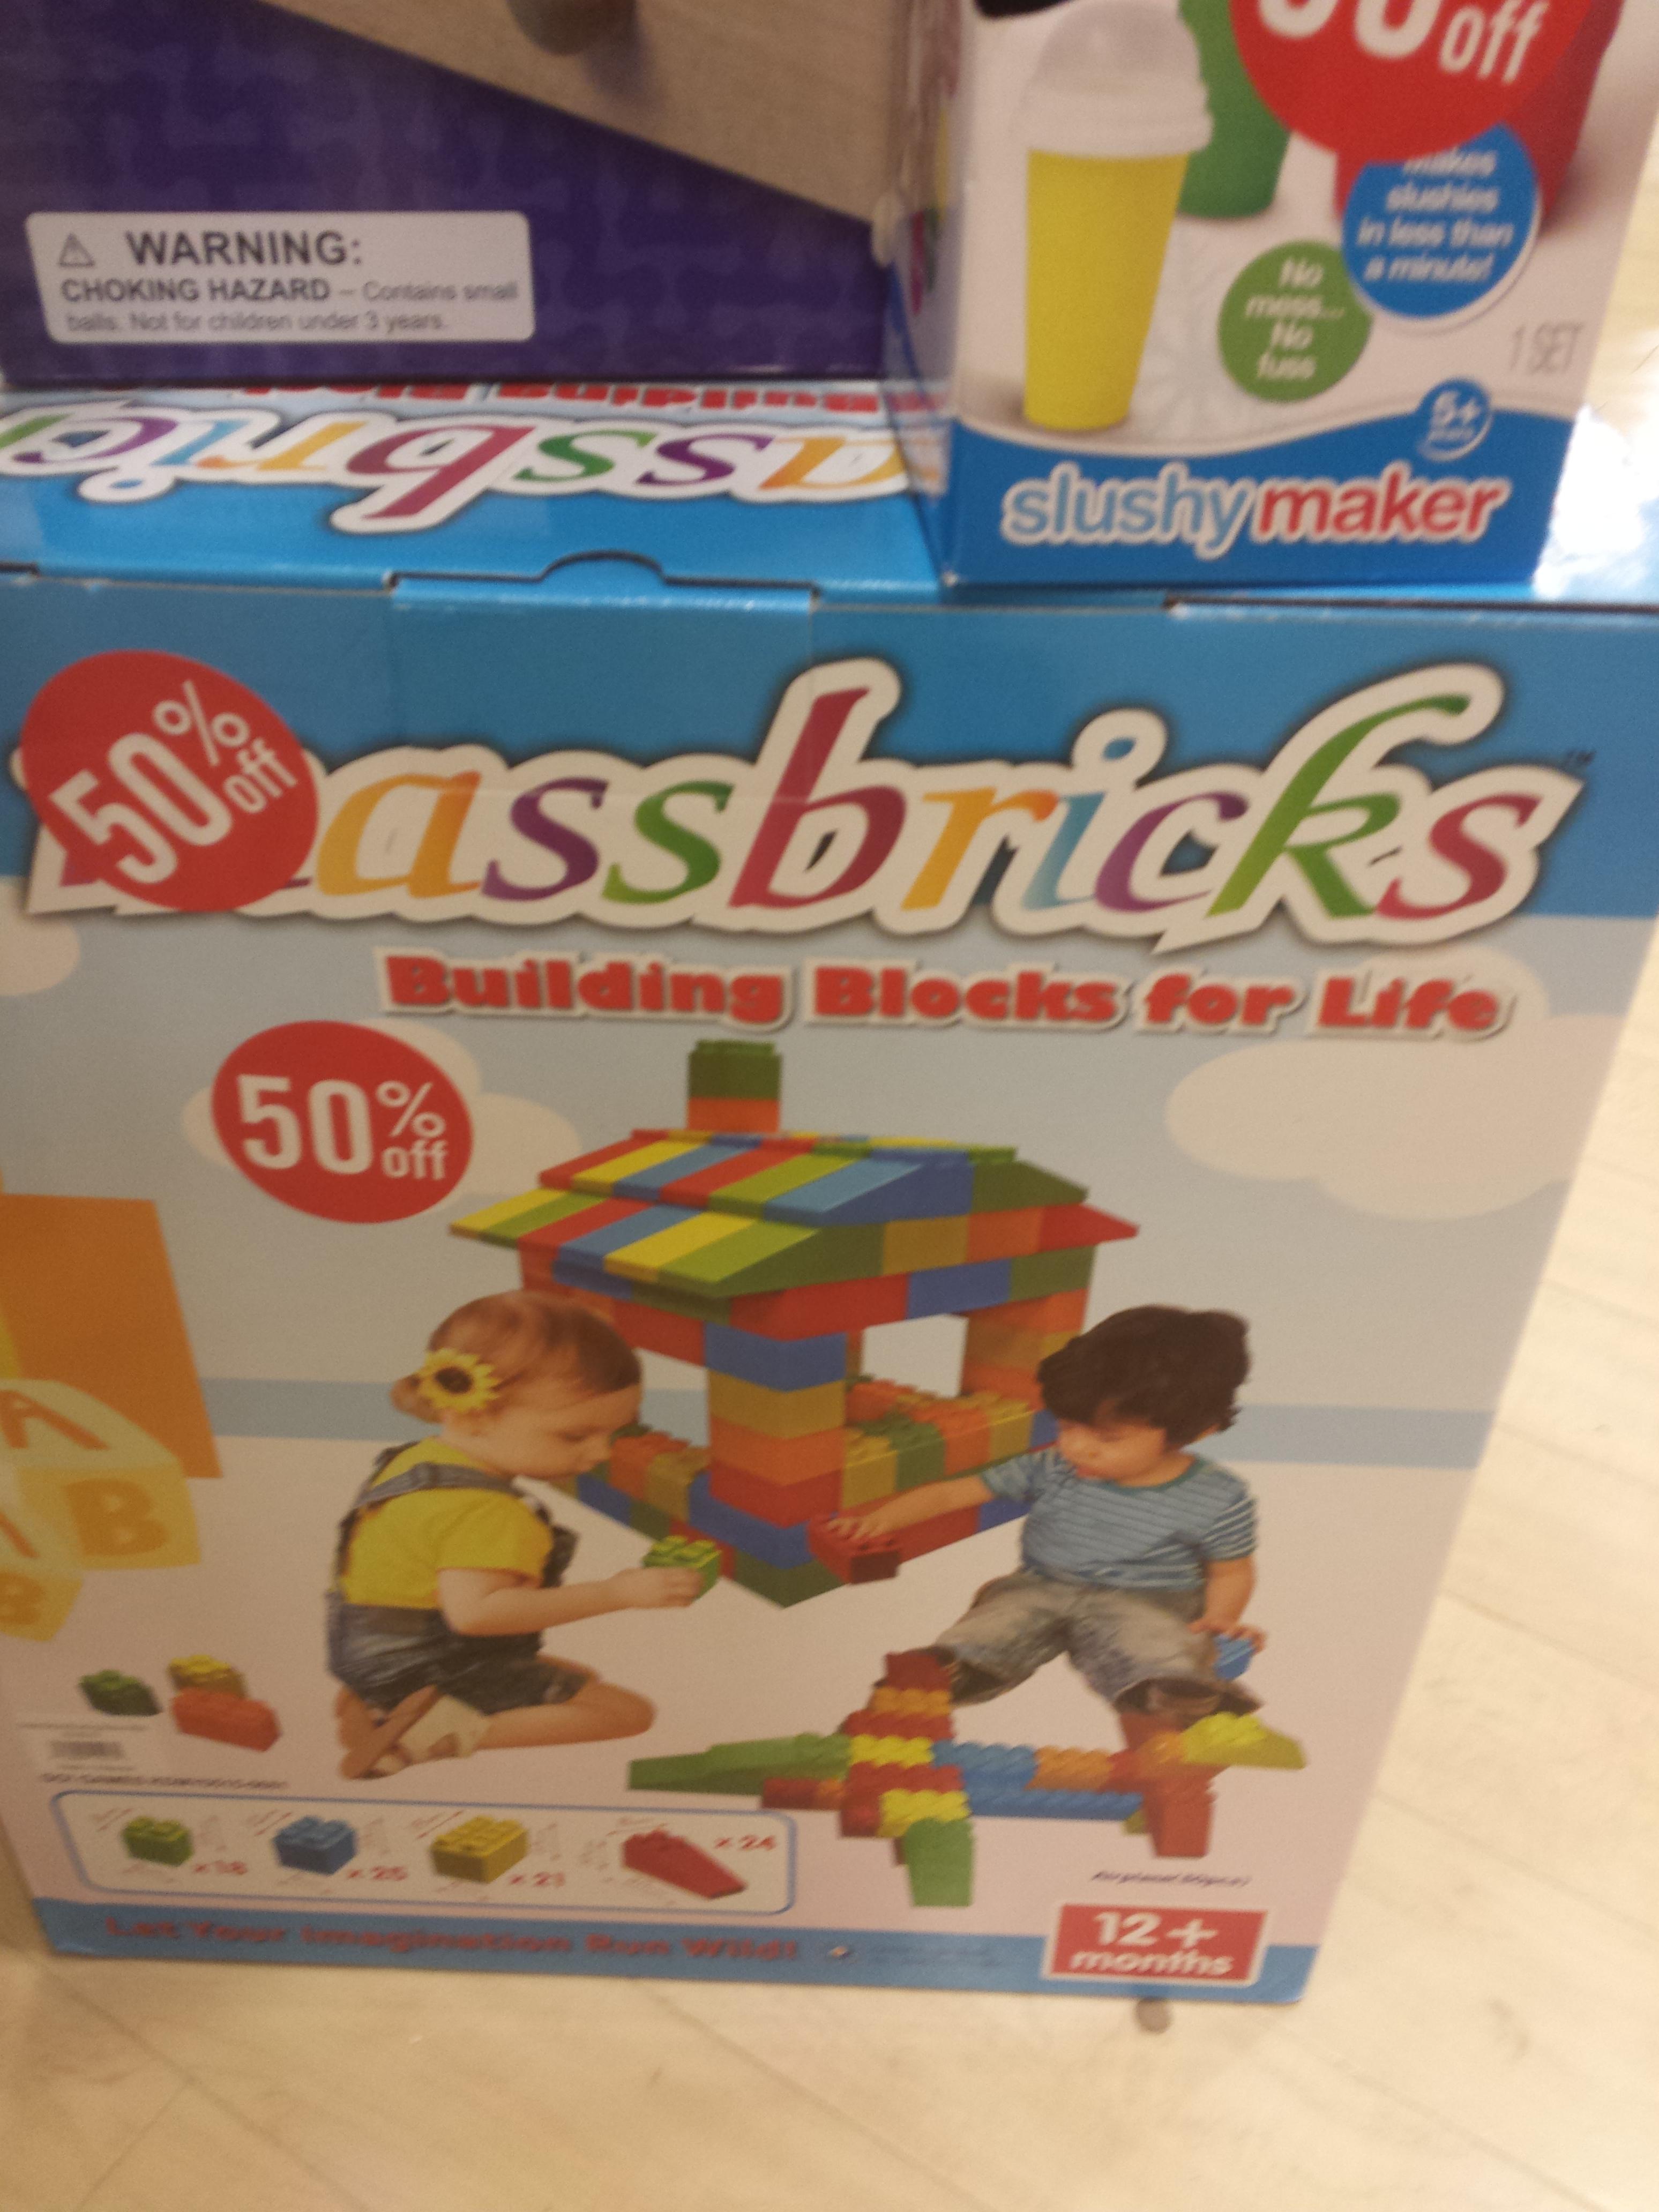 Get some assbricks for your kids to play